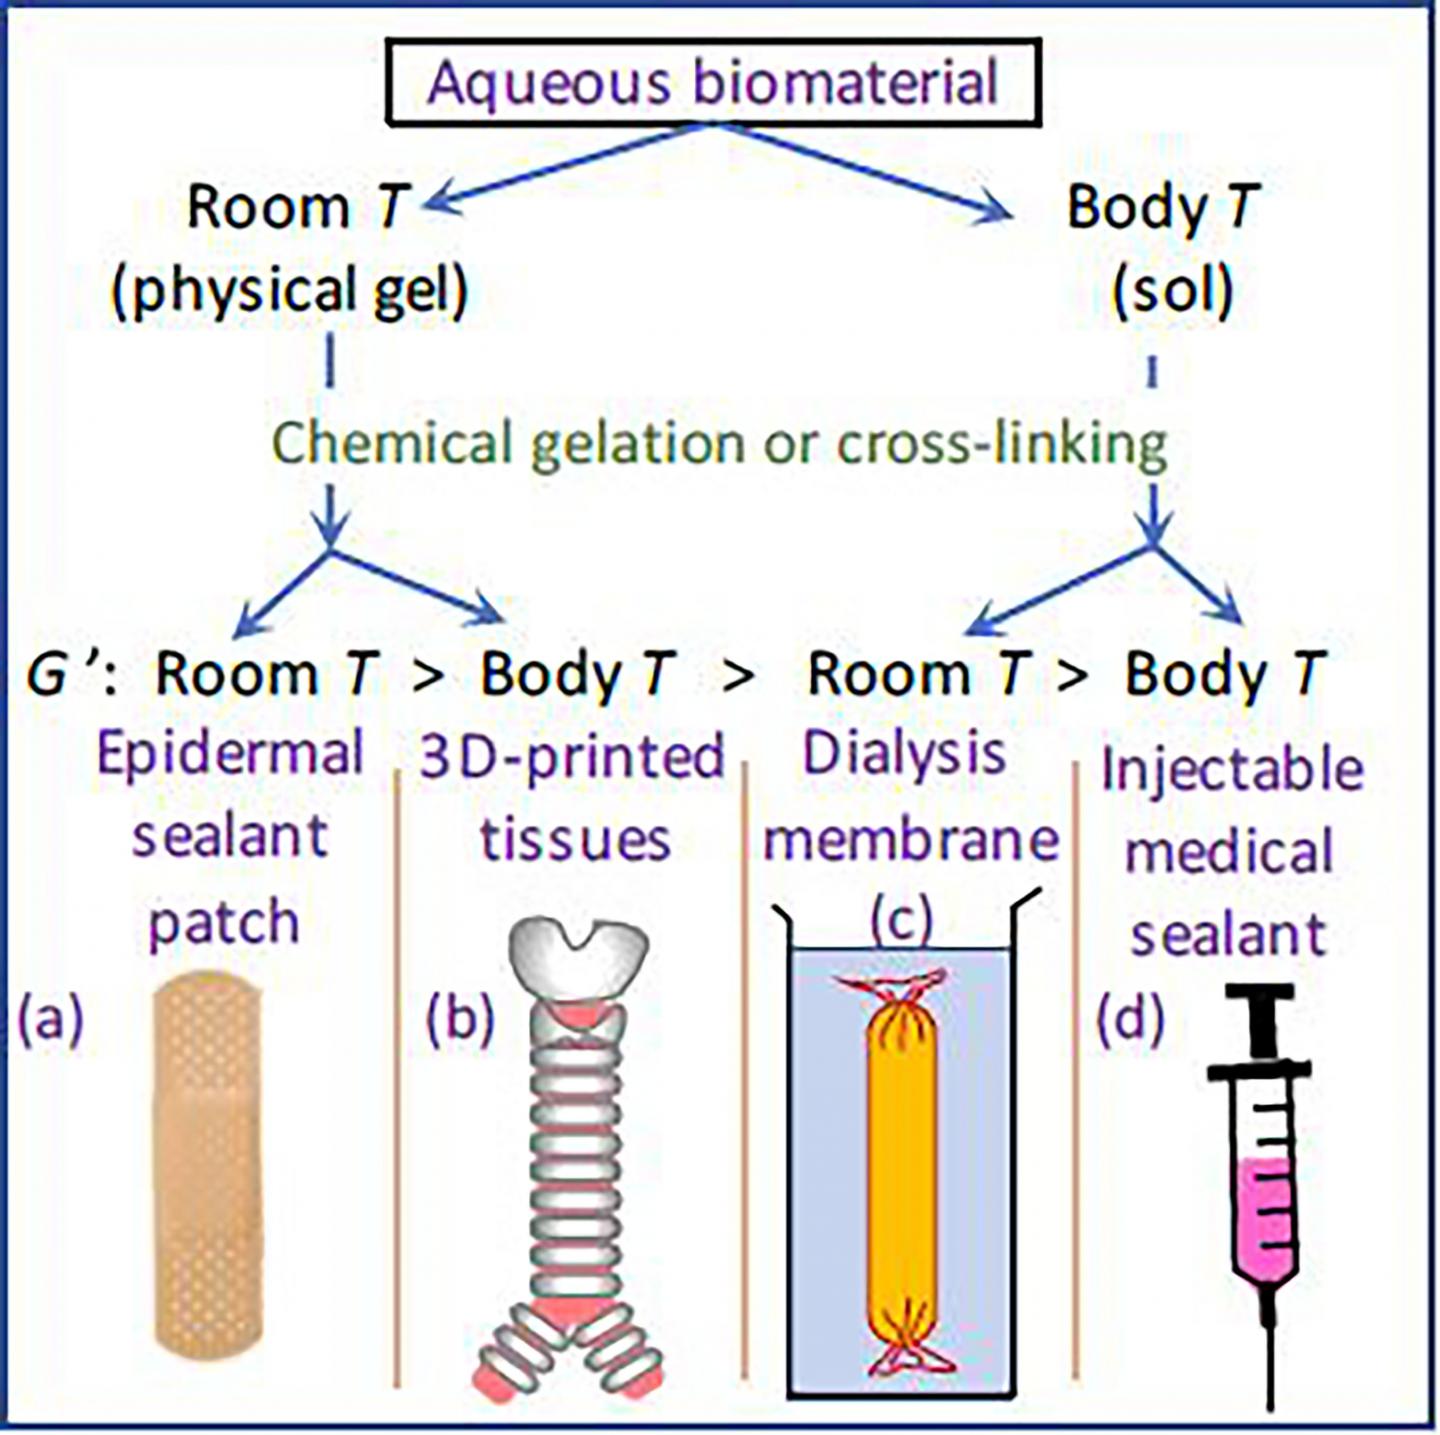 Different Temperatures Are Used to Create Different Products of Biomaterials